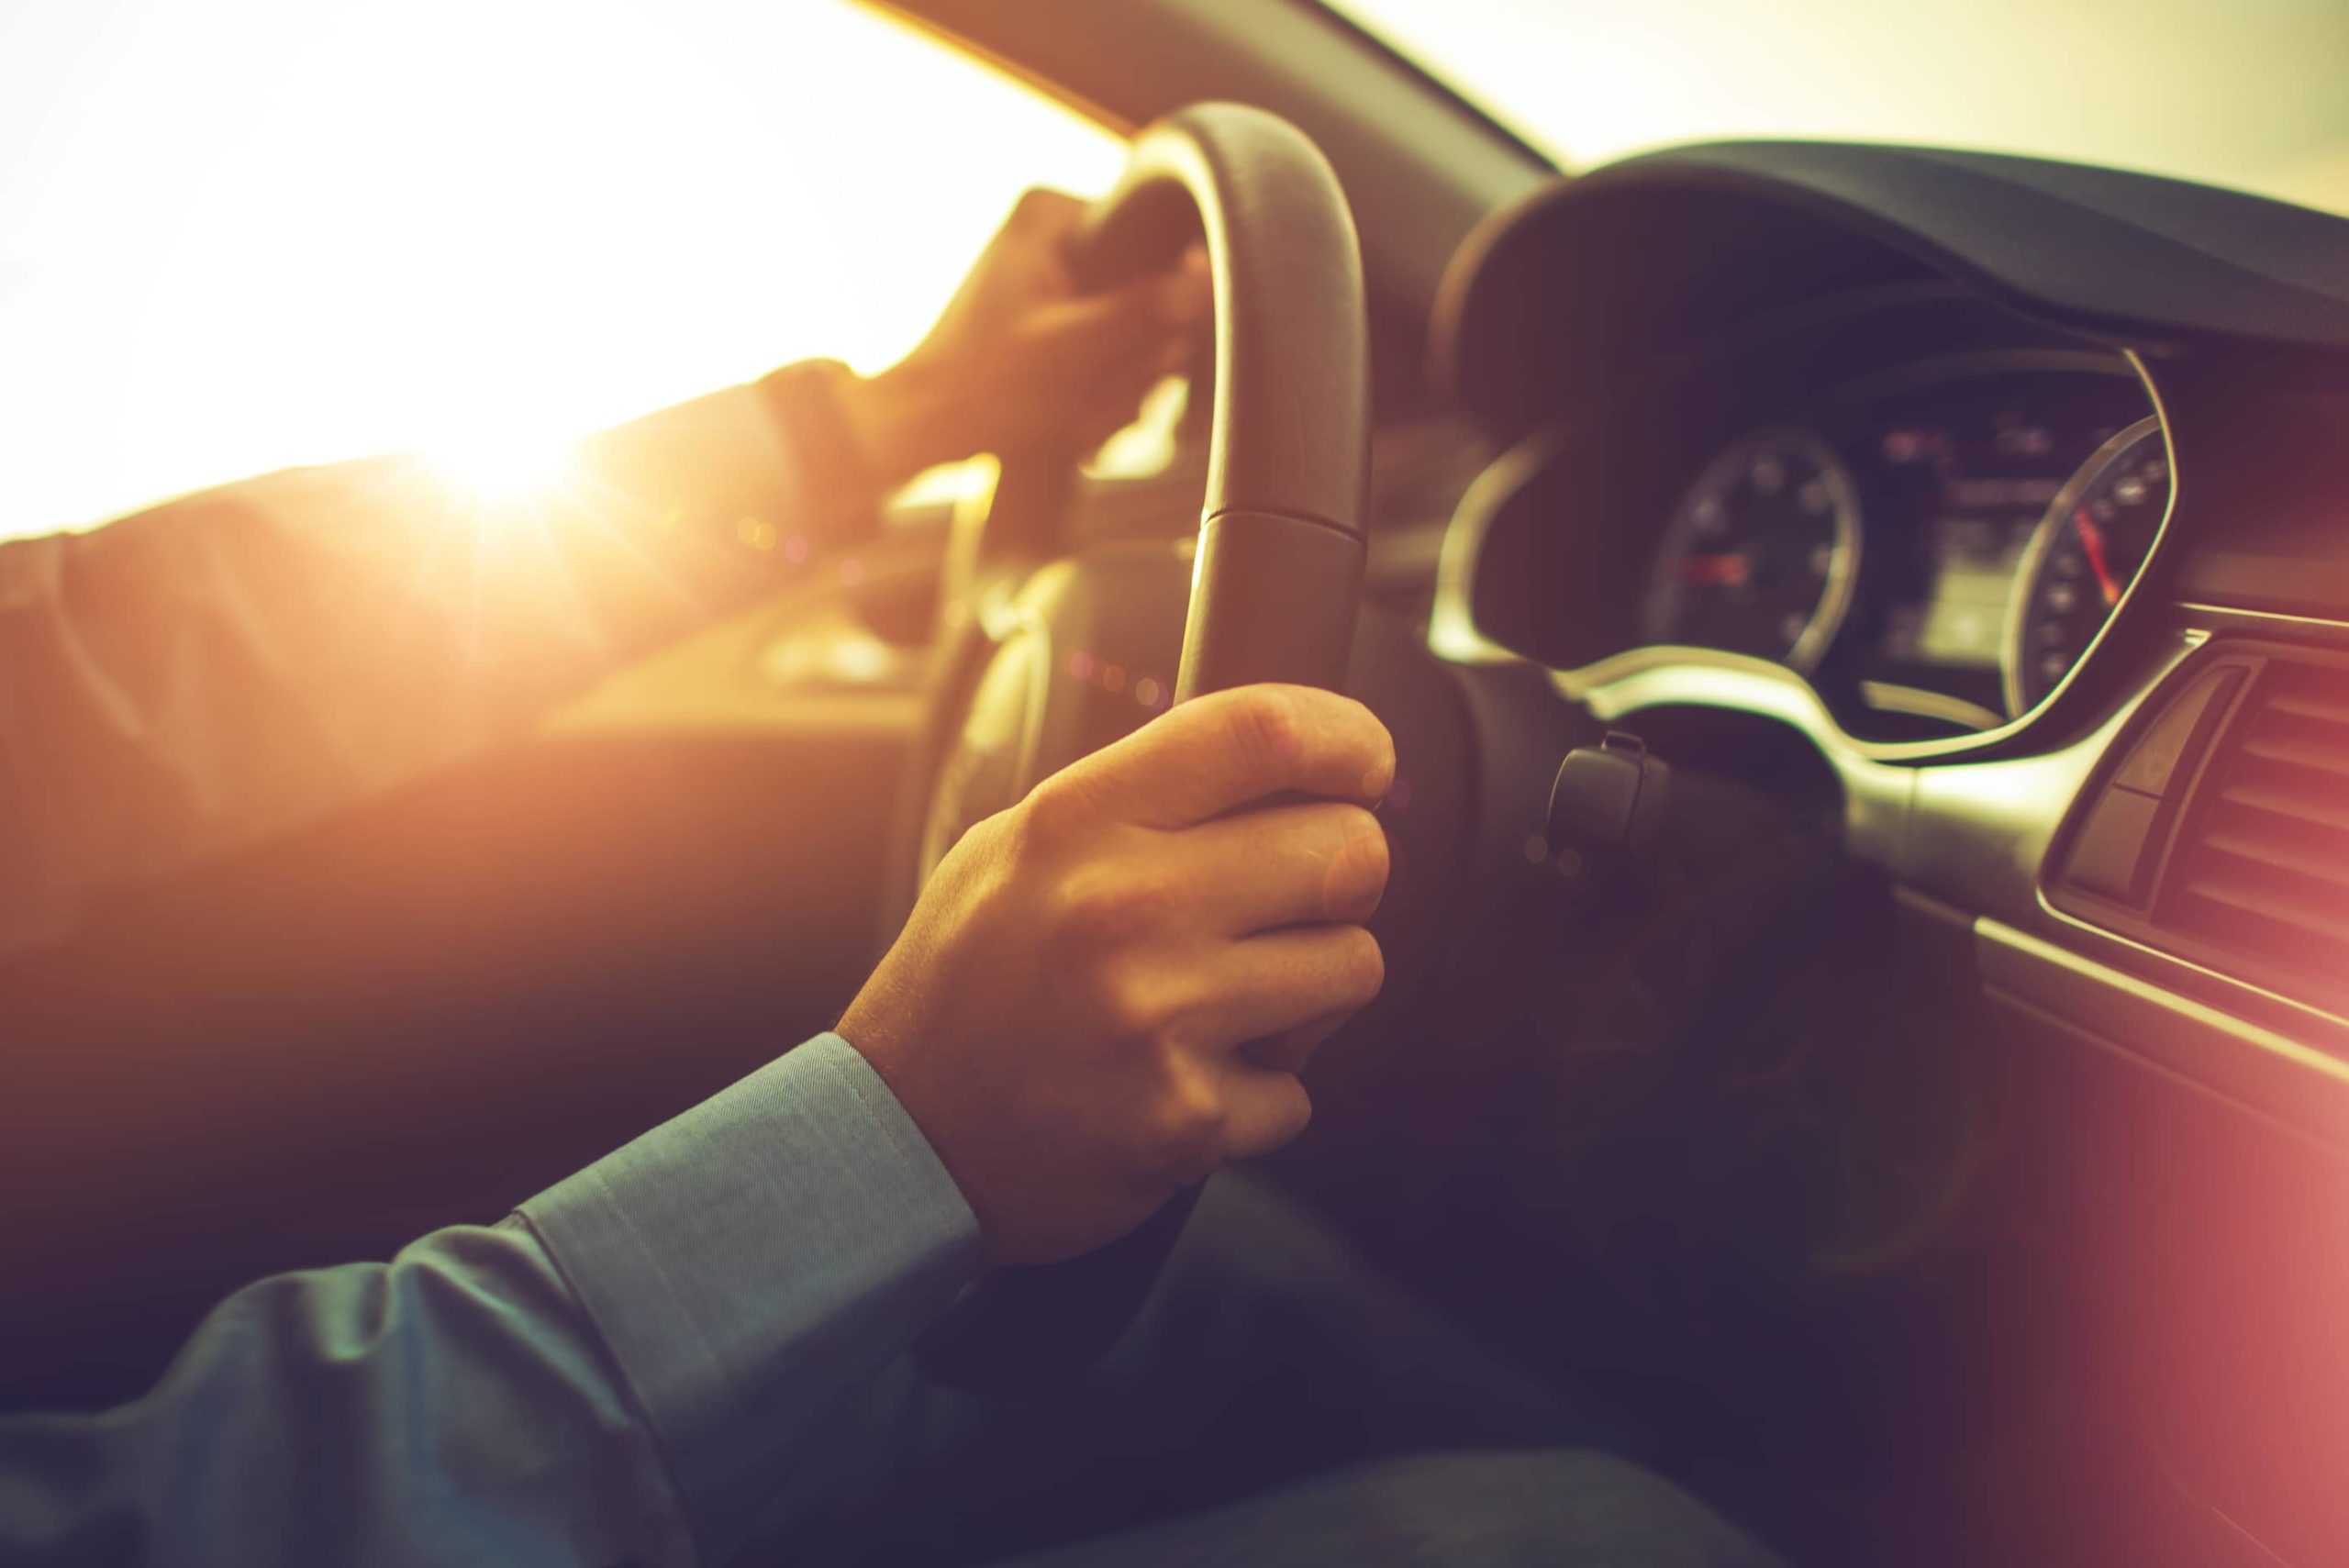 Seven Tips to Prevent Hot Car Deaths This Summer